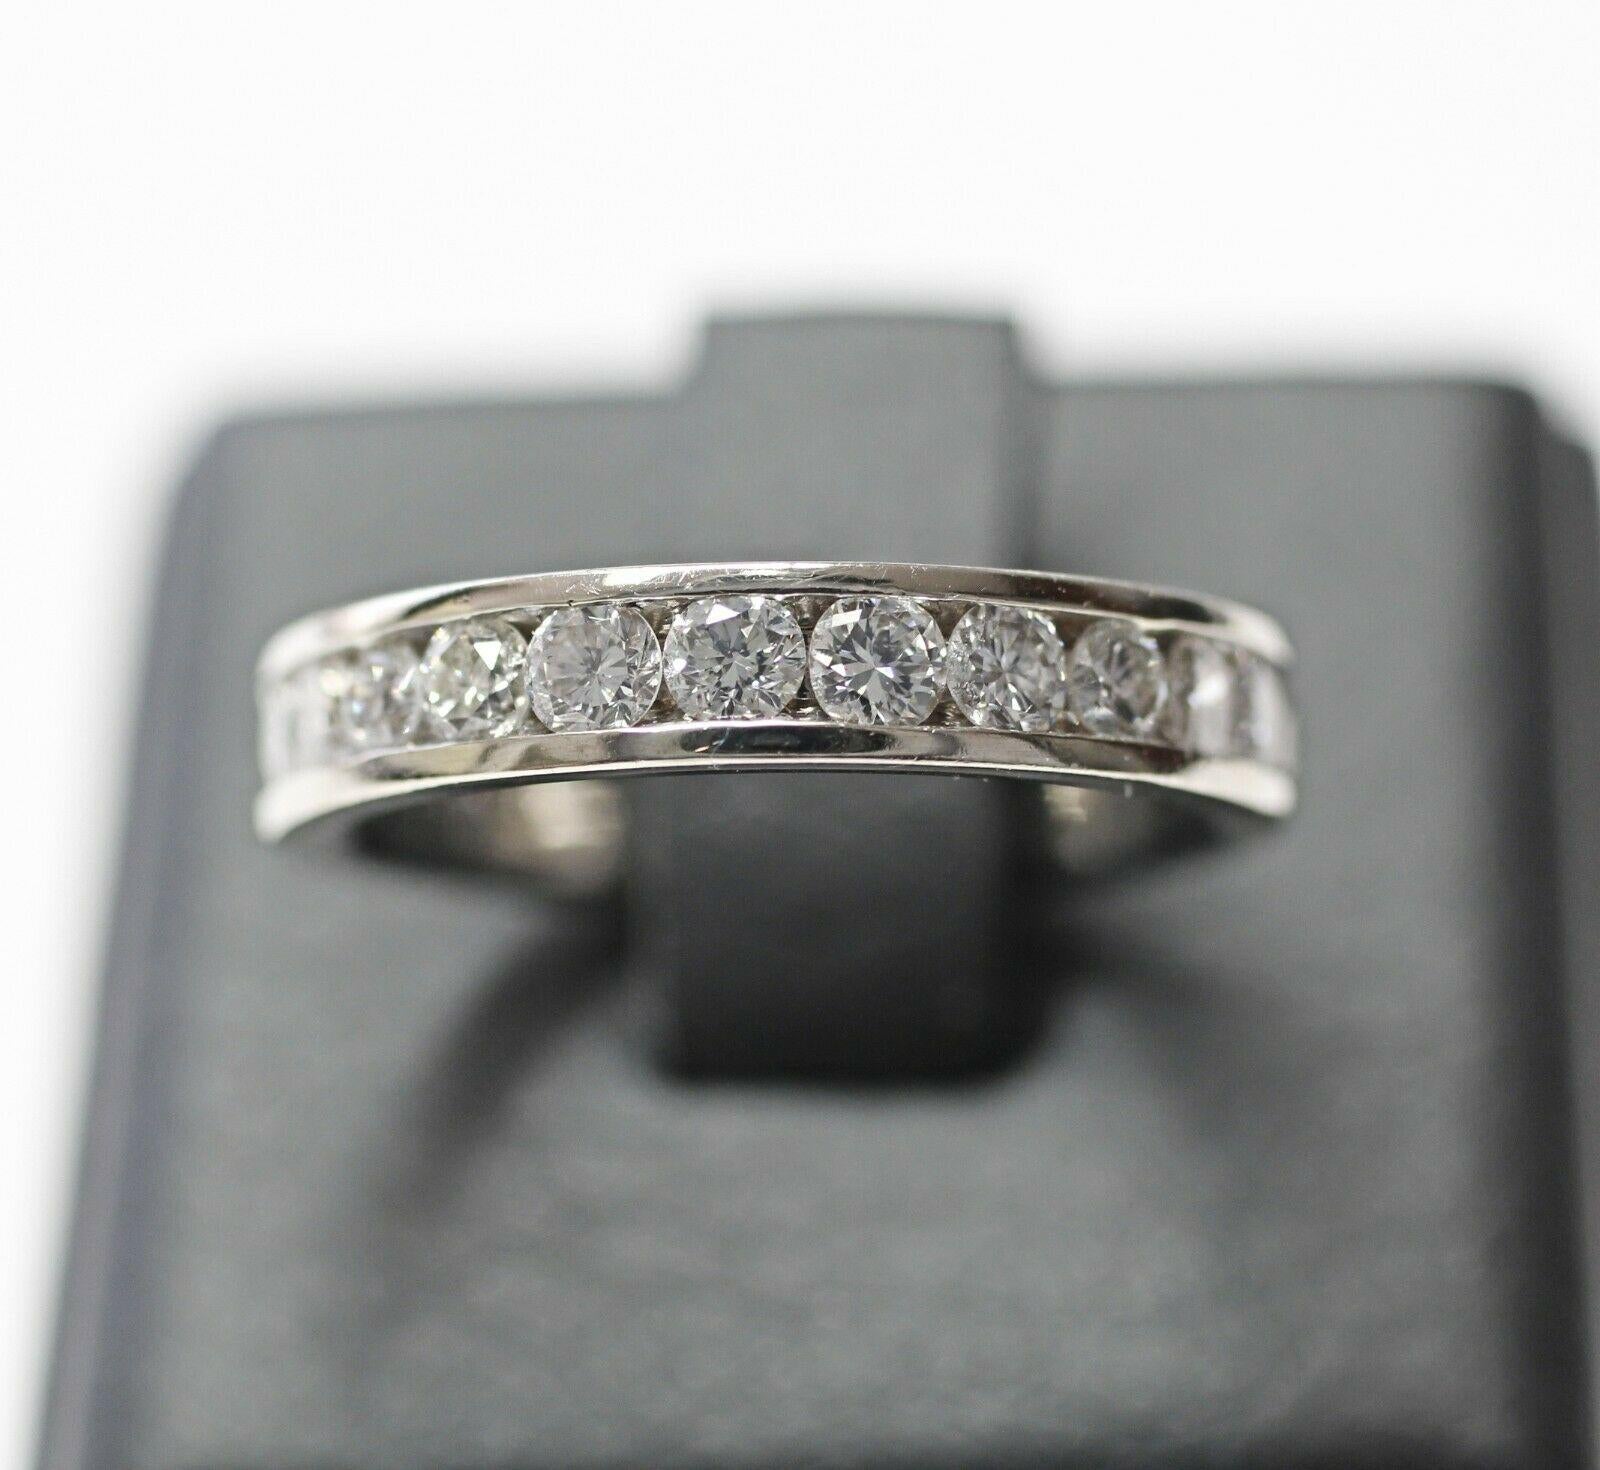  Beautiful diamond eternity ring features 11 pieces of diamonds in approximately 0.50 carat total weight, G color and Si1 in clarity. This ring crafted in 14k white gold in size 4.25US
Specifications:
    main stone: ROUND CUT DIAMOND
    diamonds: